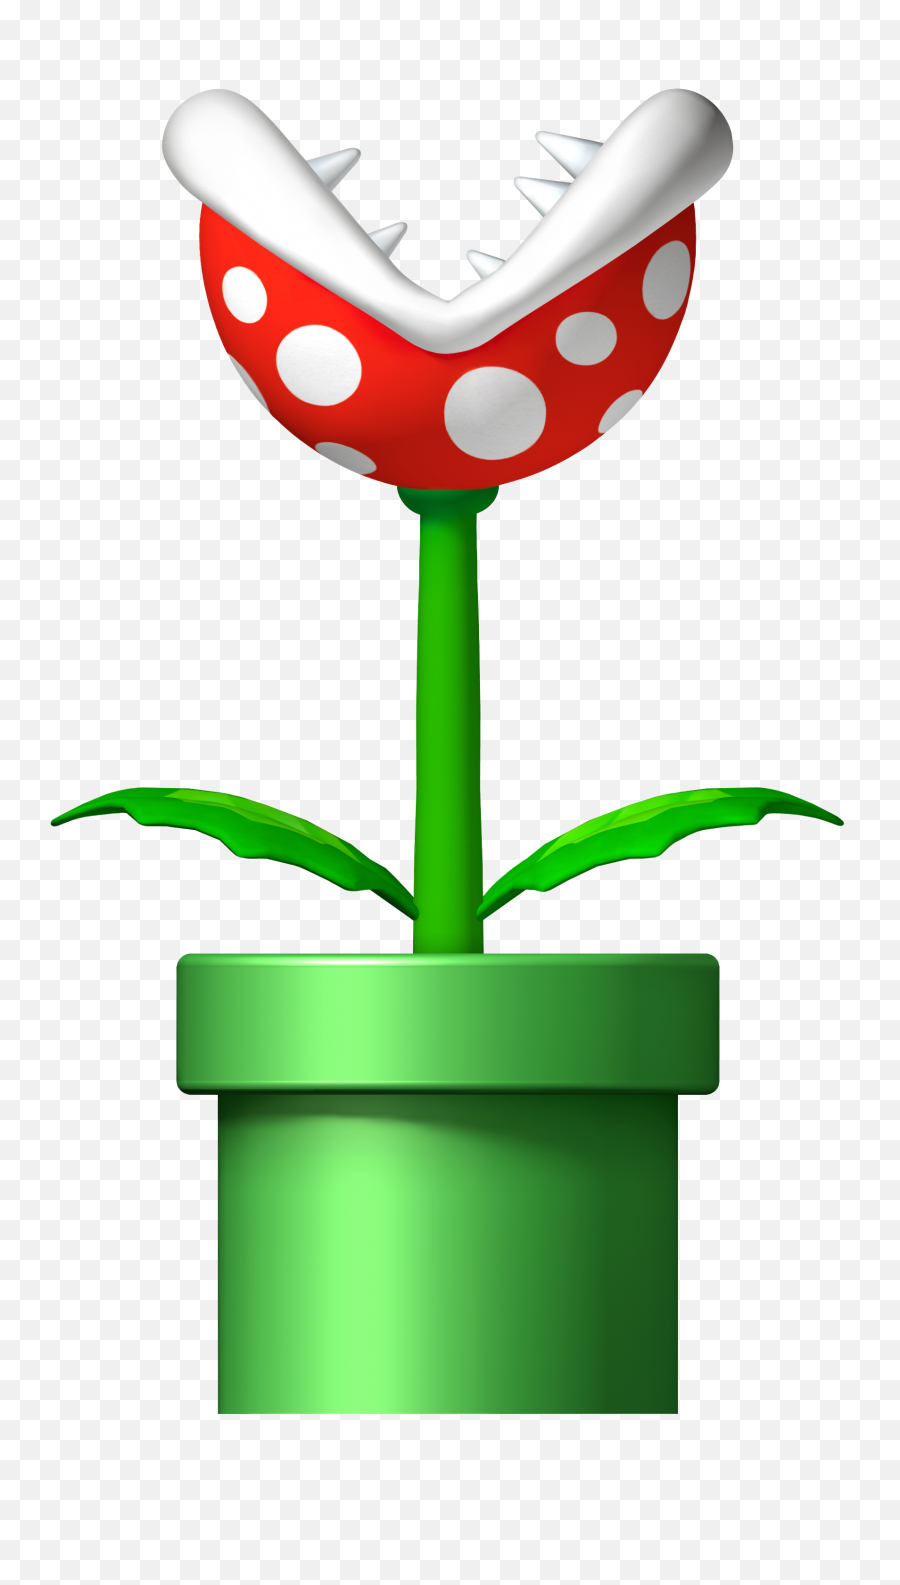 This Png File Is About Games New Super Mario Bros - Planta Planta Mario Bros Png Emoji,Mario Png